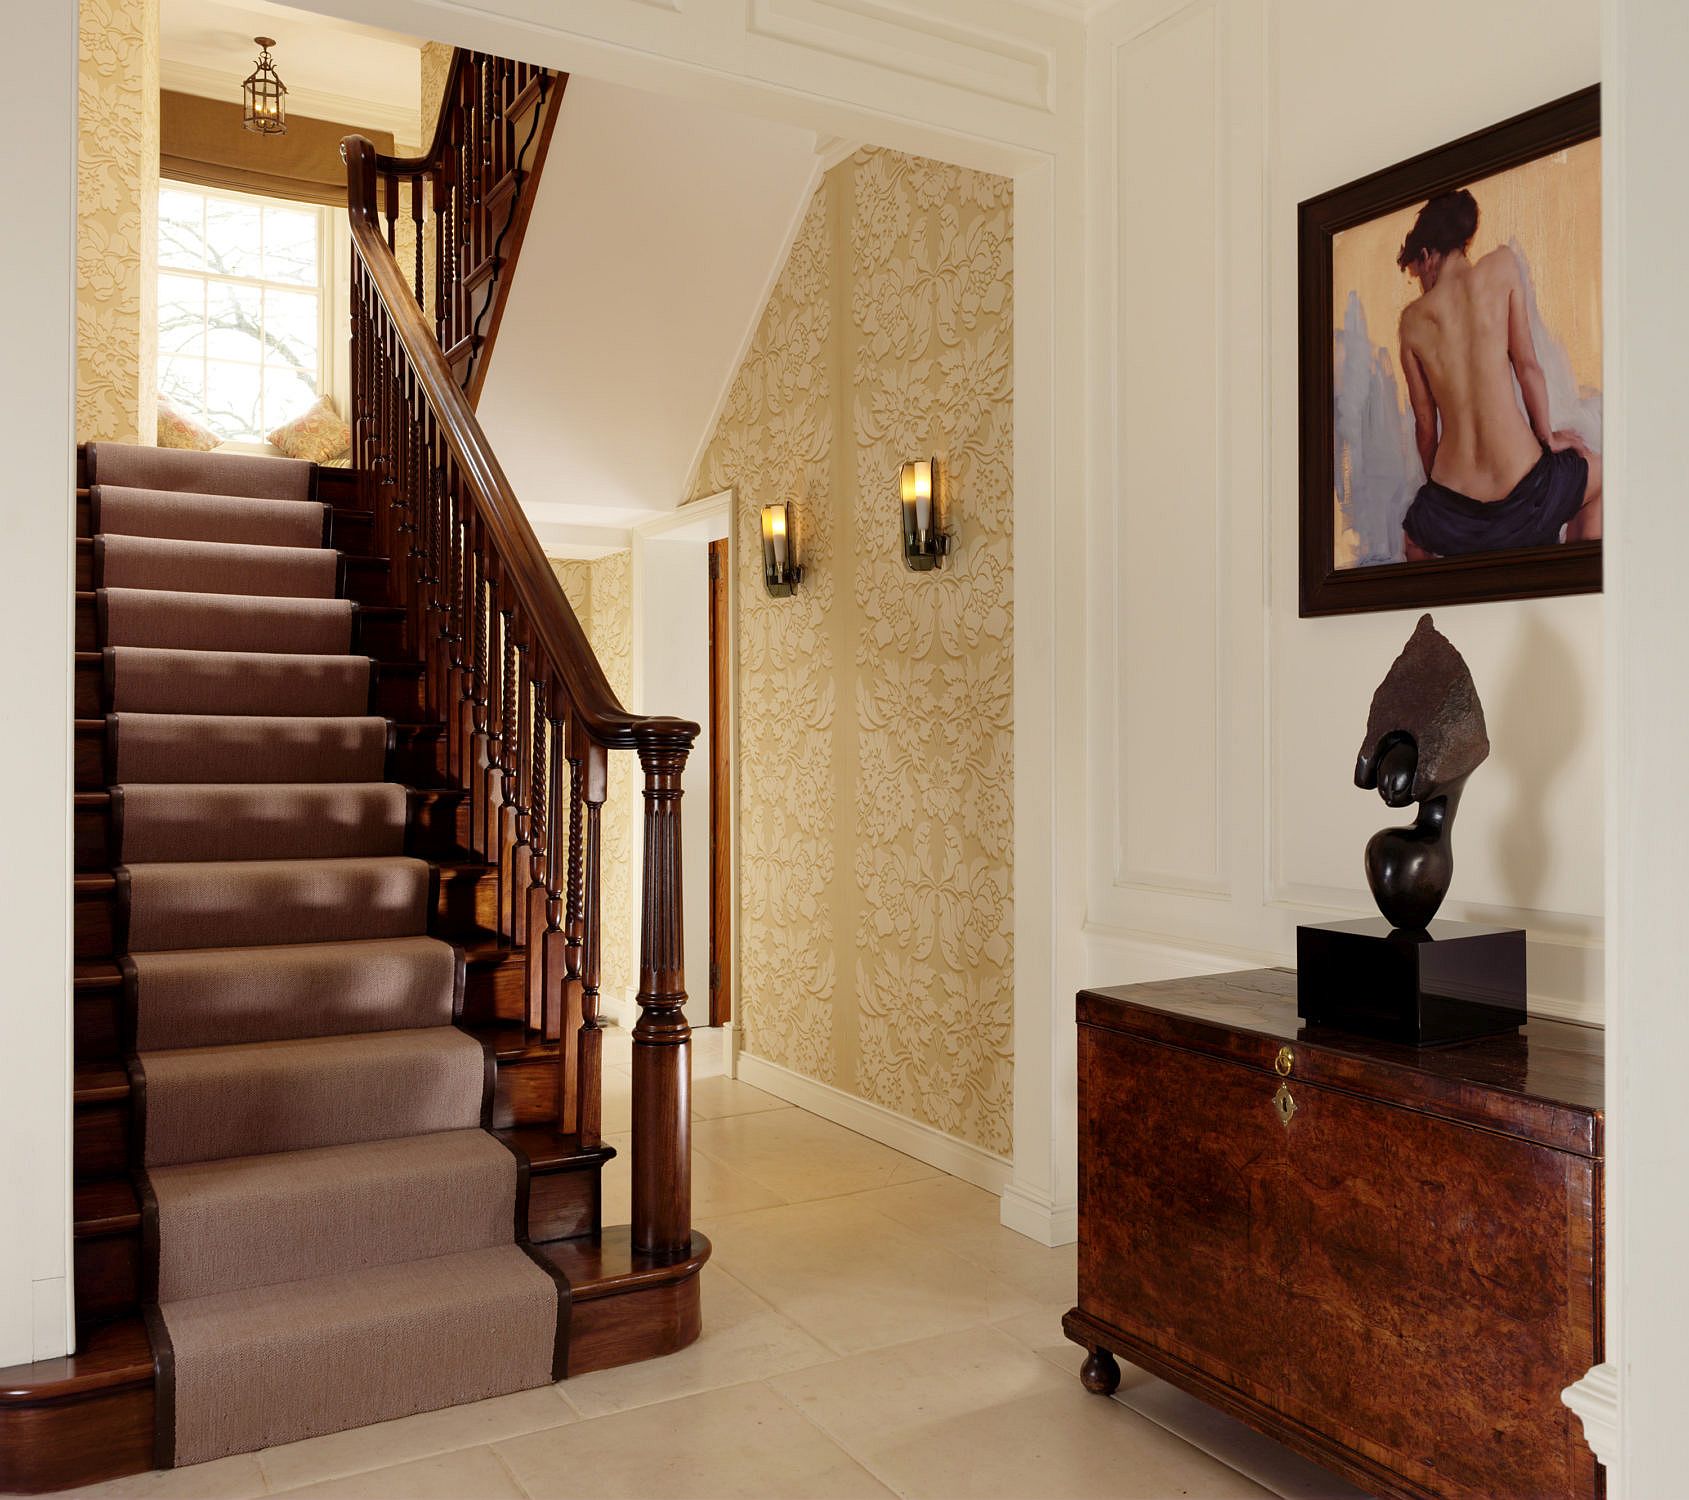 Traditional staircase connecting different levels of the house